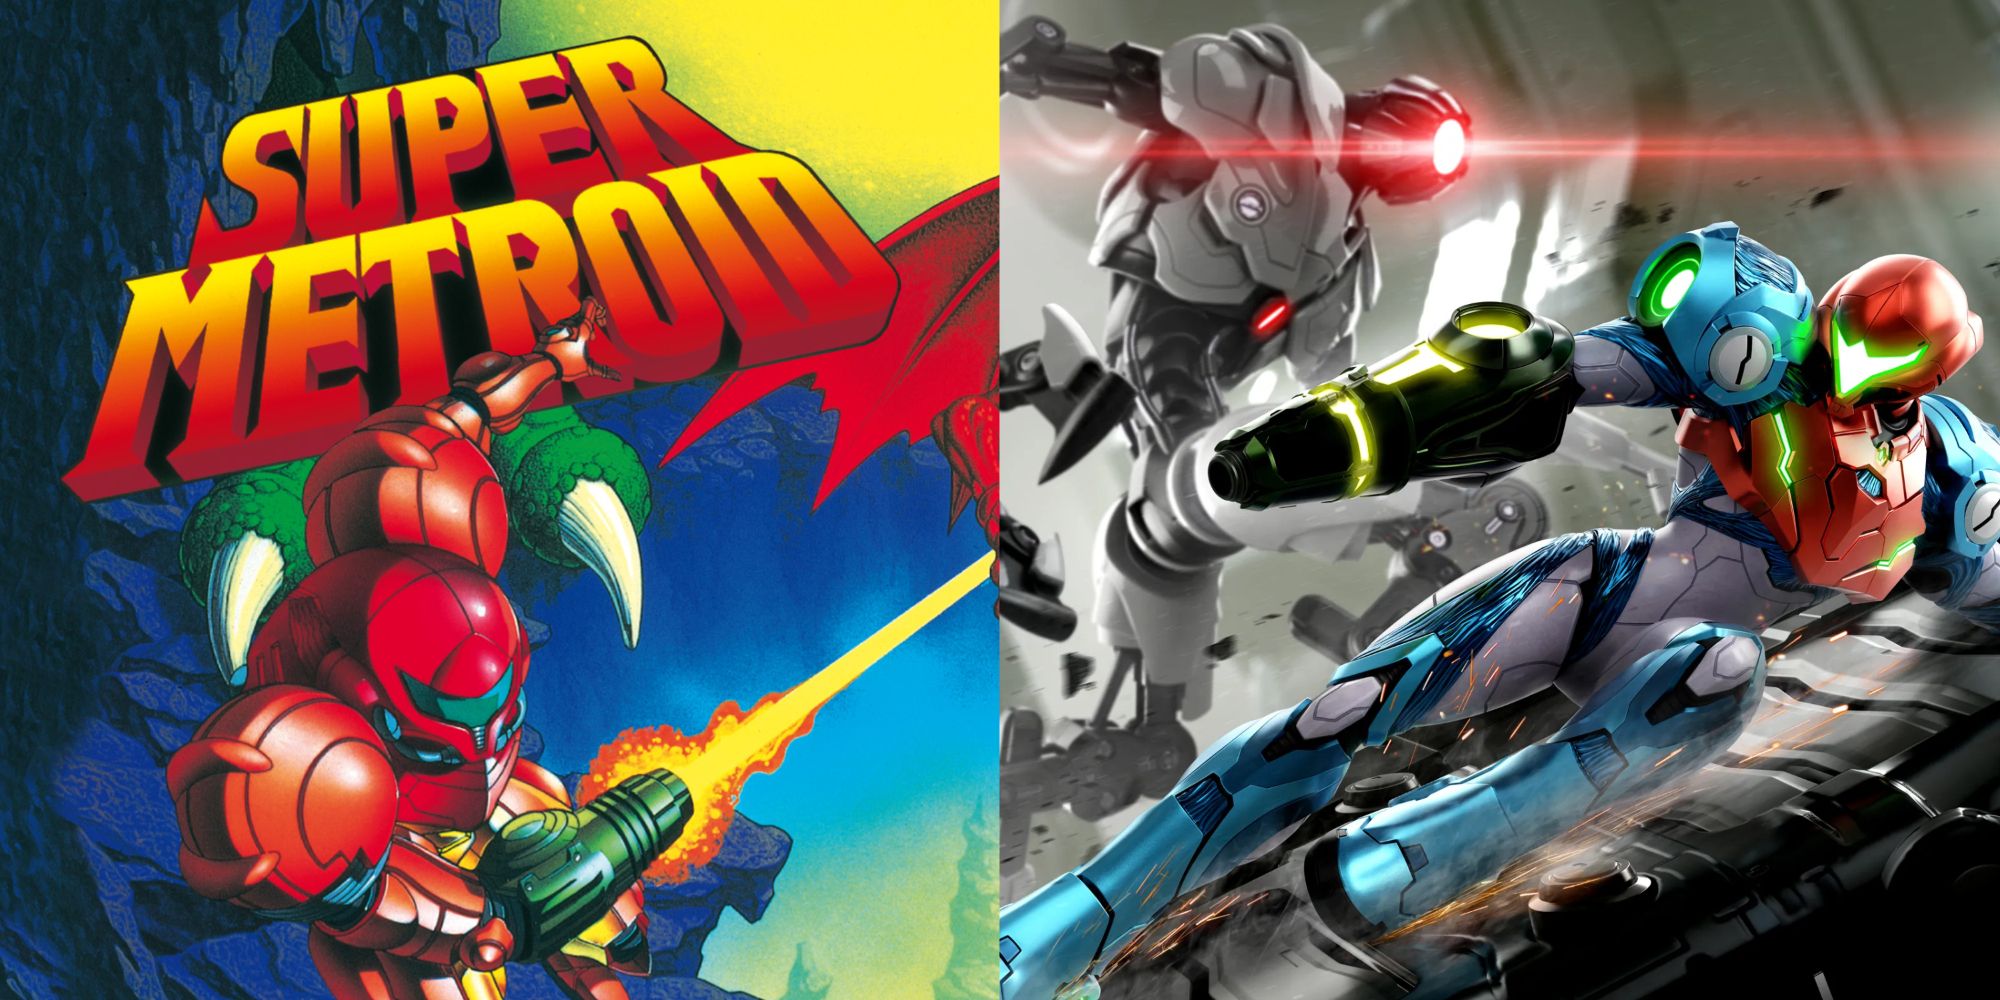 A composite image of the Super Metroid cover art and a Metroid Dread promotional image